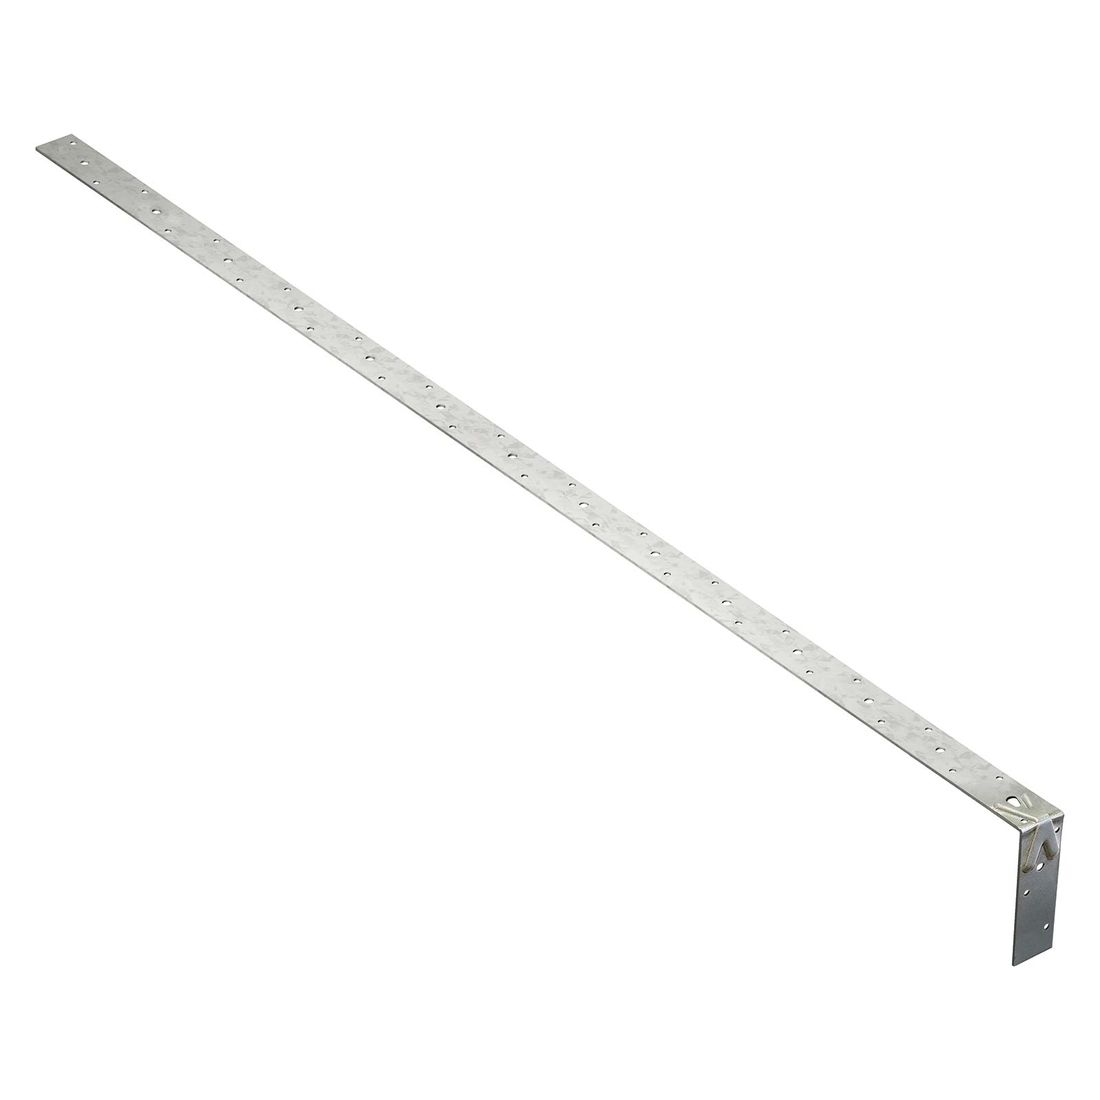 Engineered Strap Heavy Duty 800Mm Overall Bent 100Mm